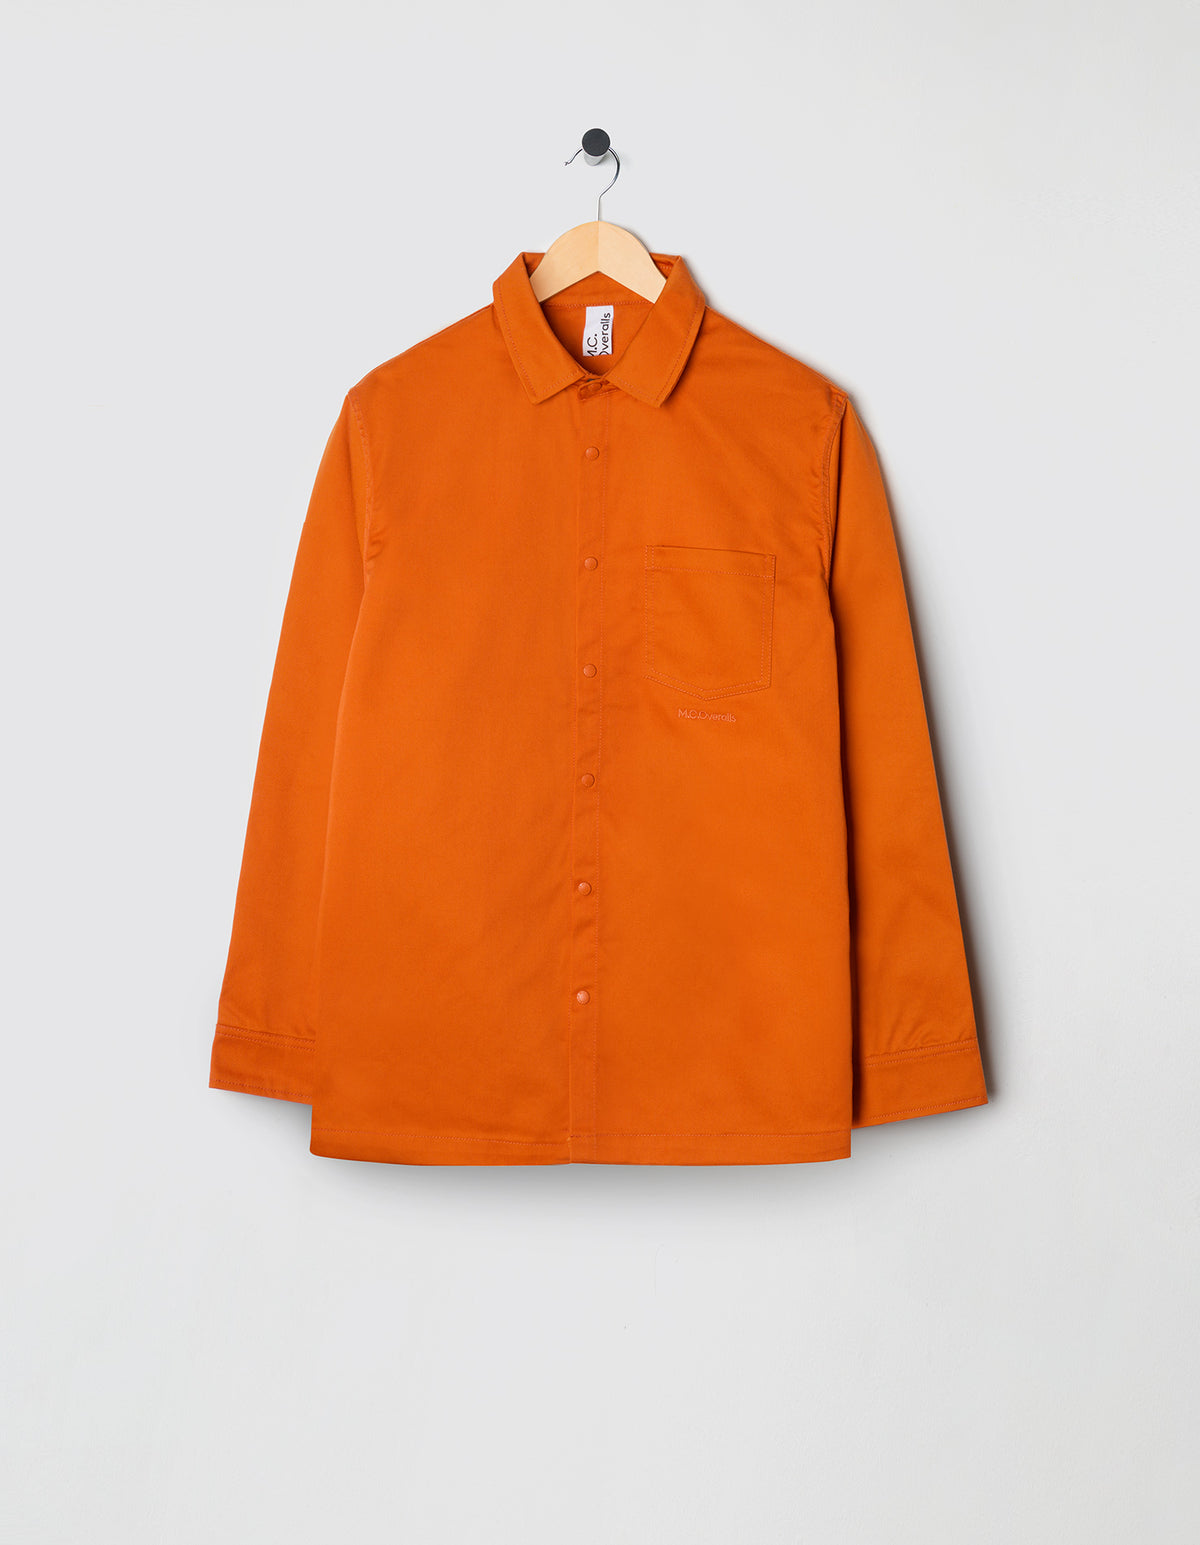 M.C.Overalls Poly Cotton Snap Shirt - Orange , Long Sleeve Shirts, M.C.Overalls, Working Title